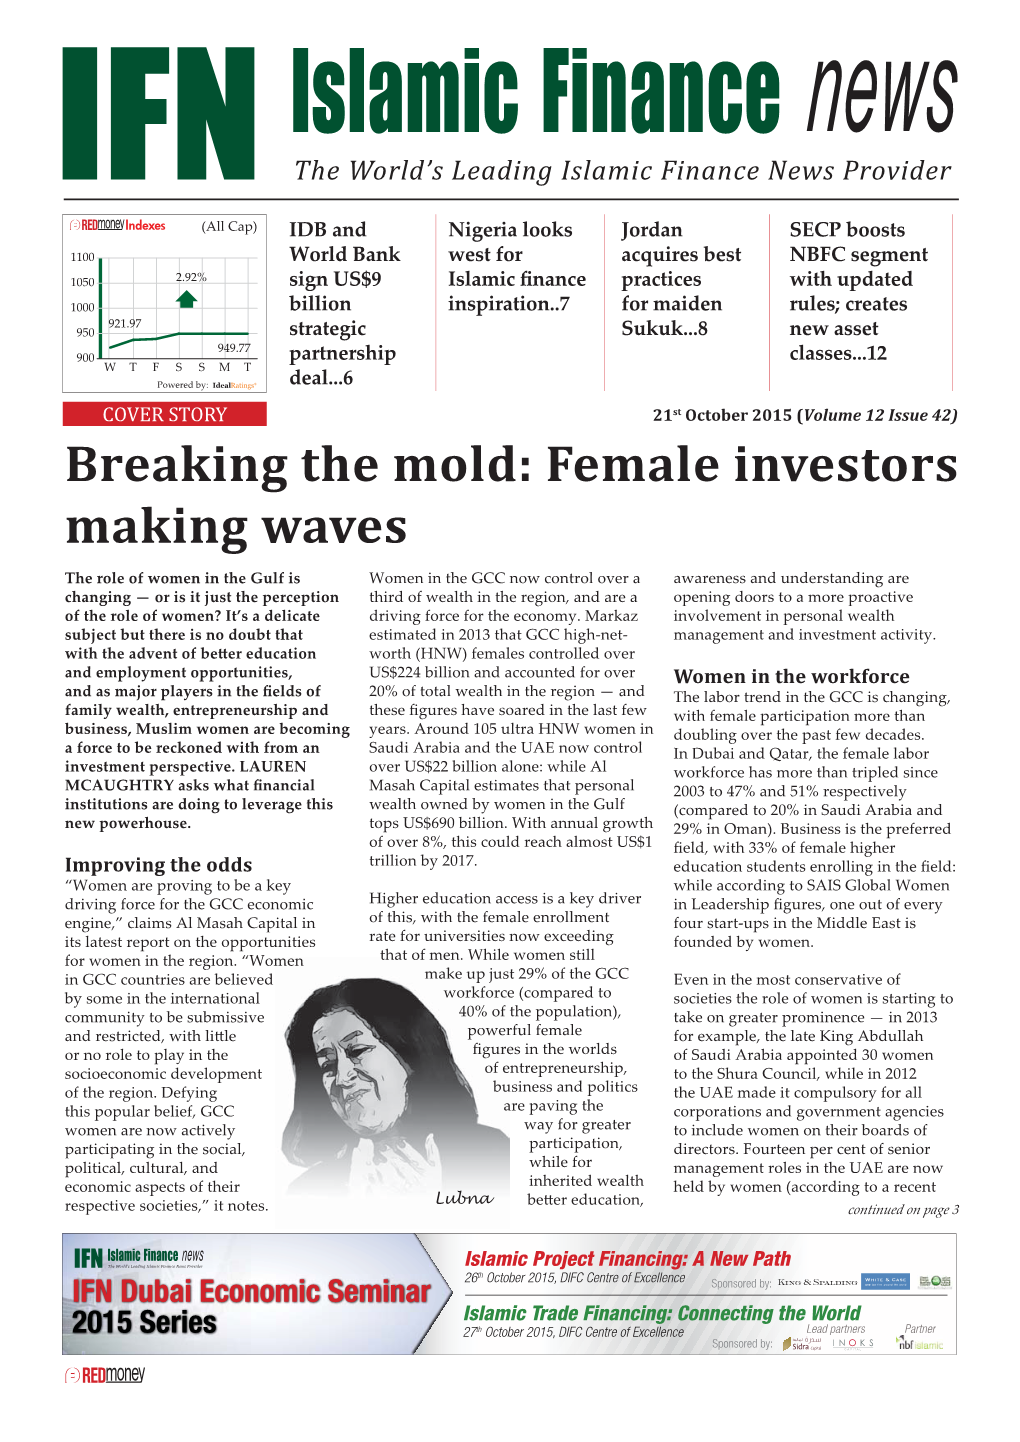 Breaking the Mold: Female Investors Making Waves